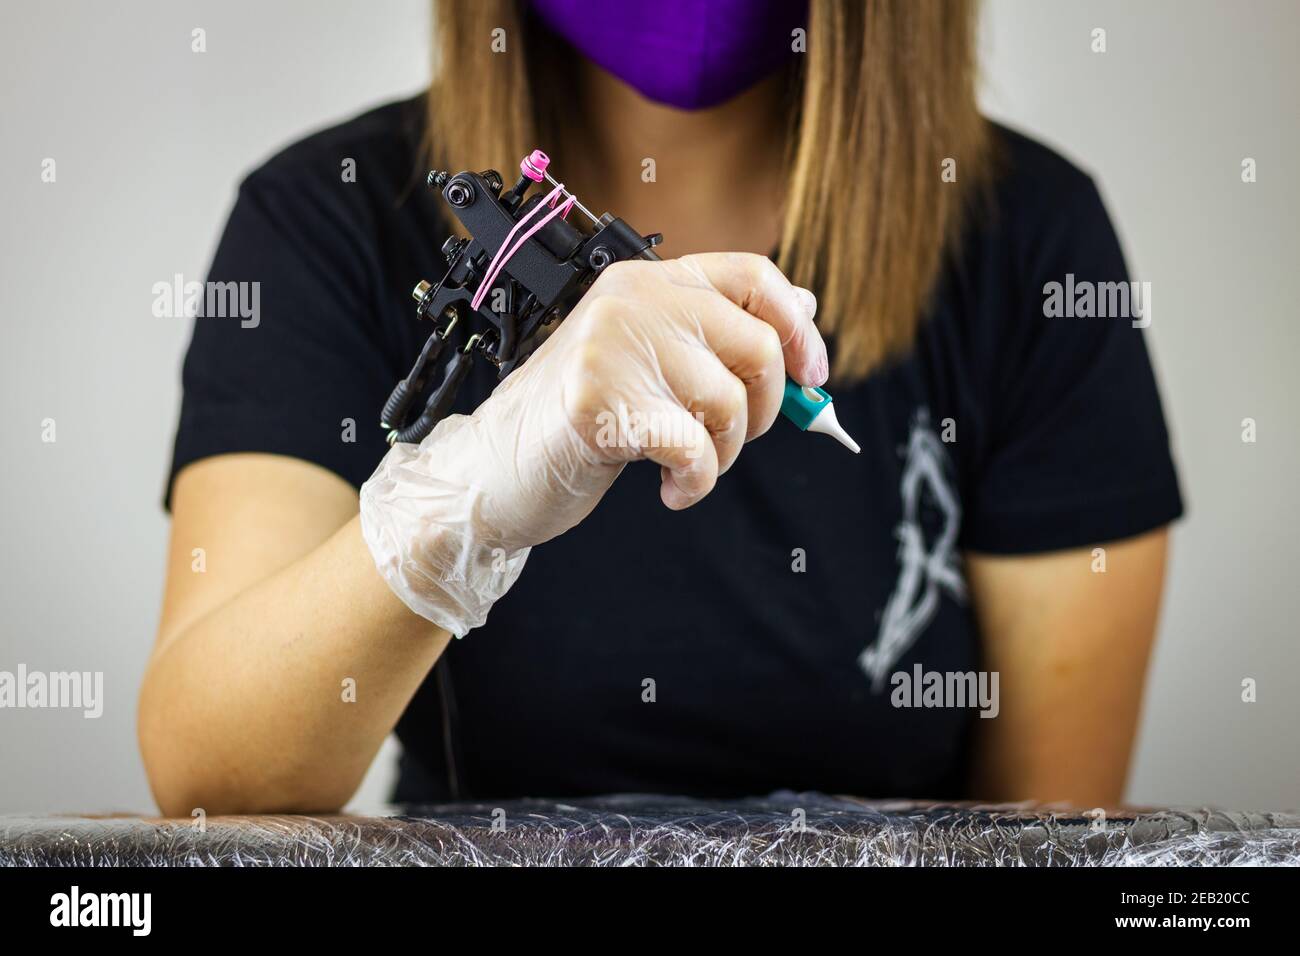 Ready for tattooing. Woman with protective glove holding tattoo machine in studio. Creative occupation Stock Photo